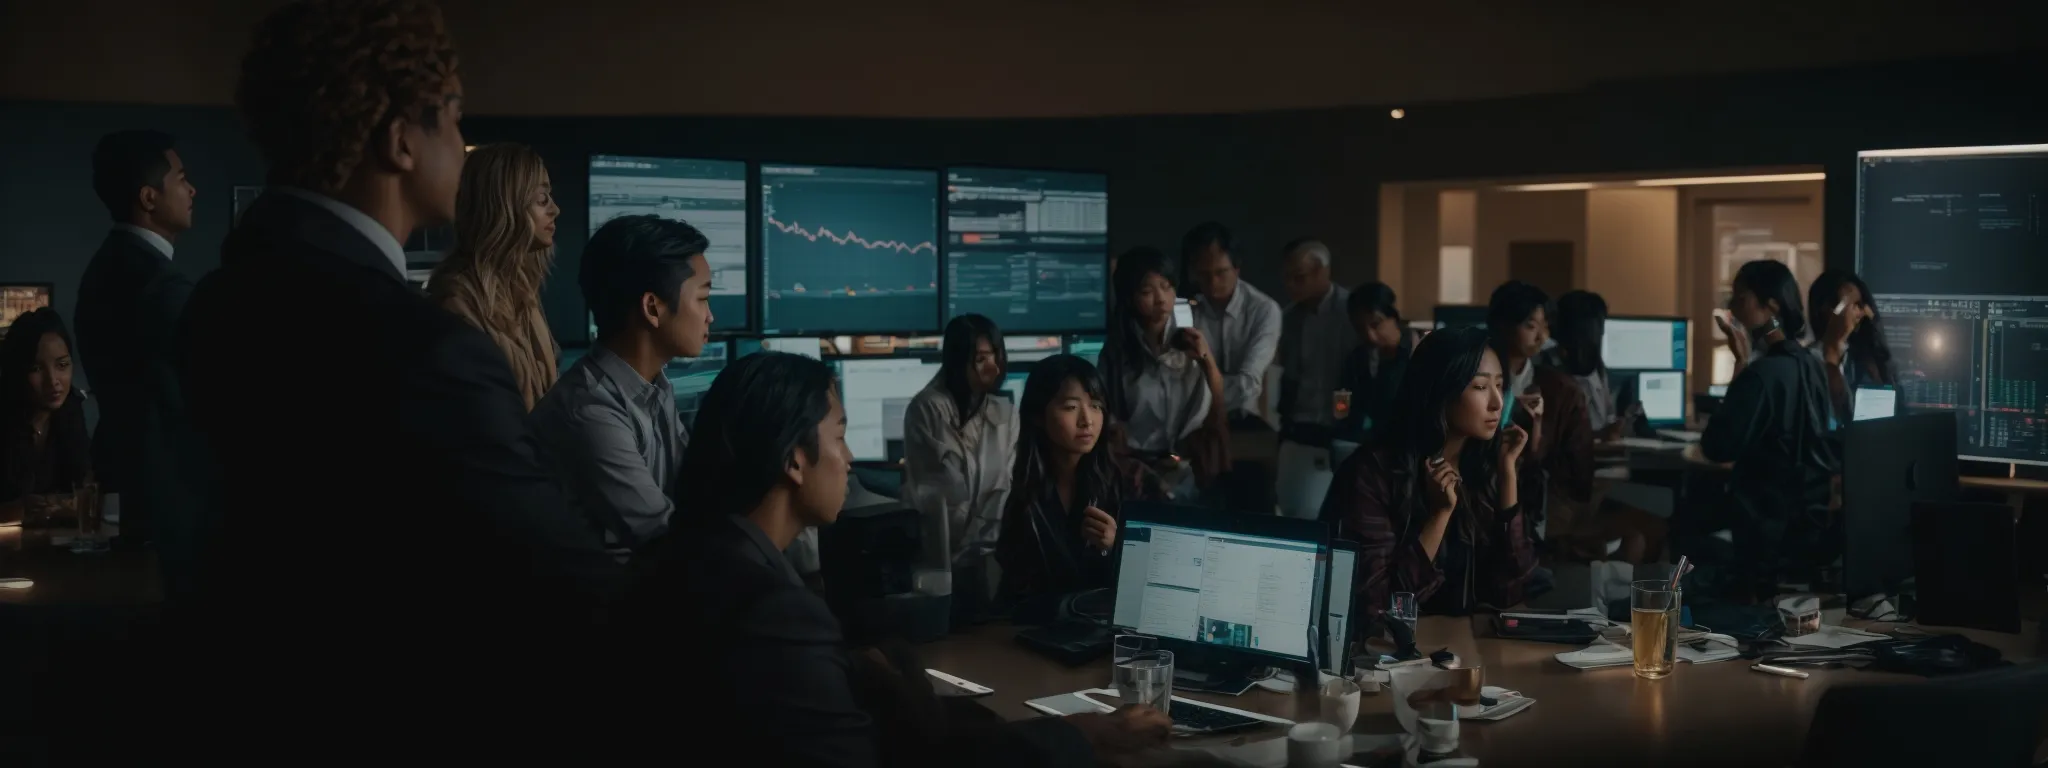 a diverse group of professionals engaged in a digital marketing strategy session around a large, illuminated computer screen.